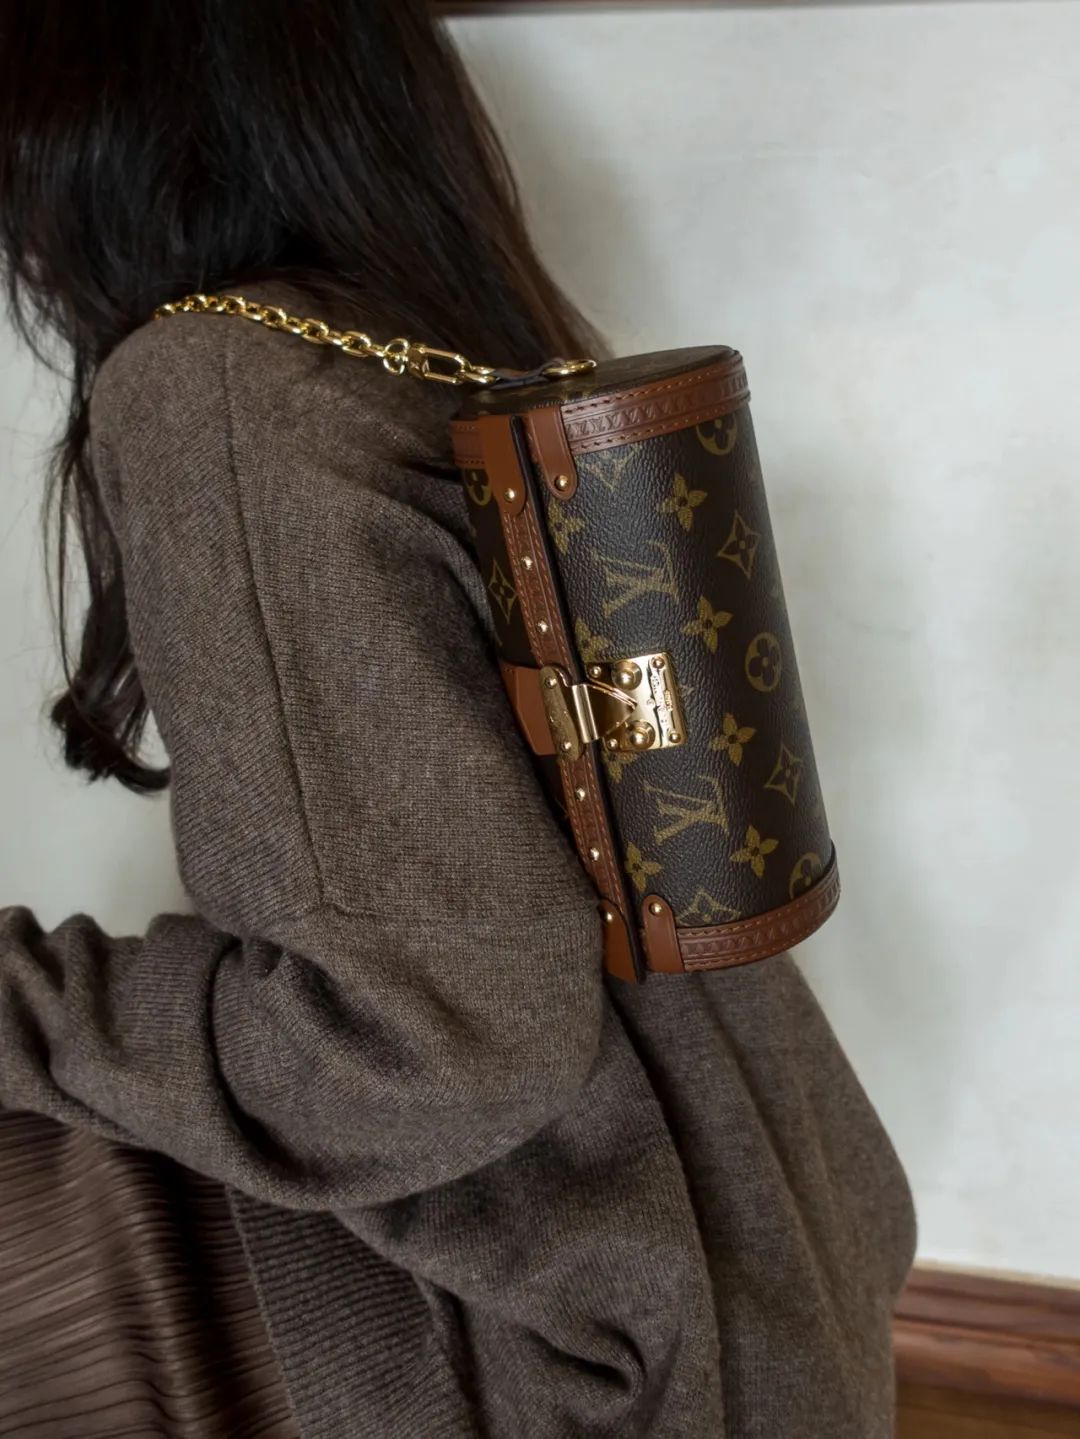 LV Papillon Trunk Papillon bag, whoever carries it looks good - iNEWS